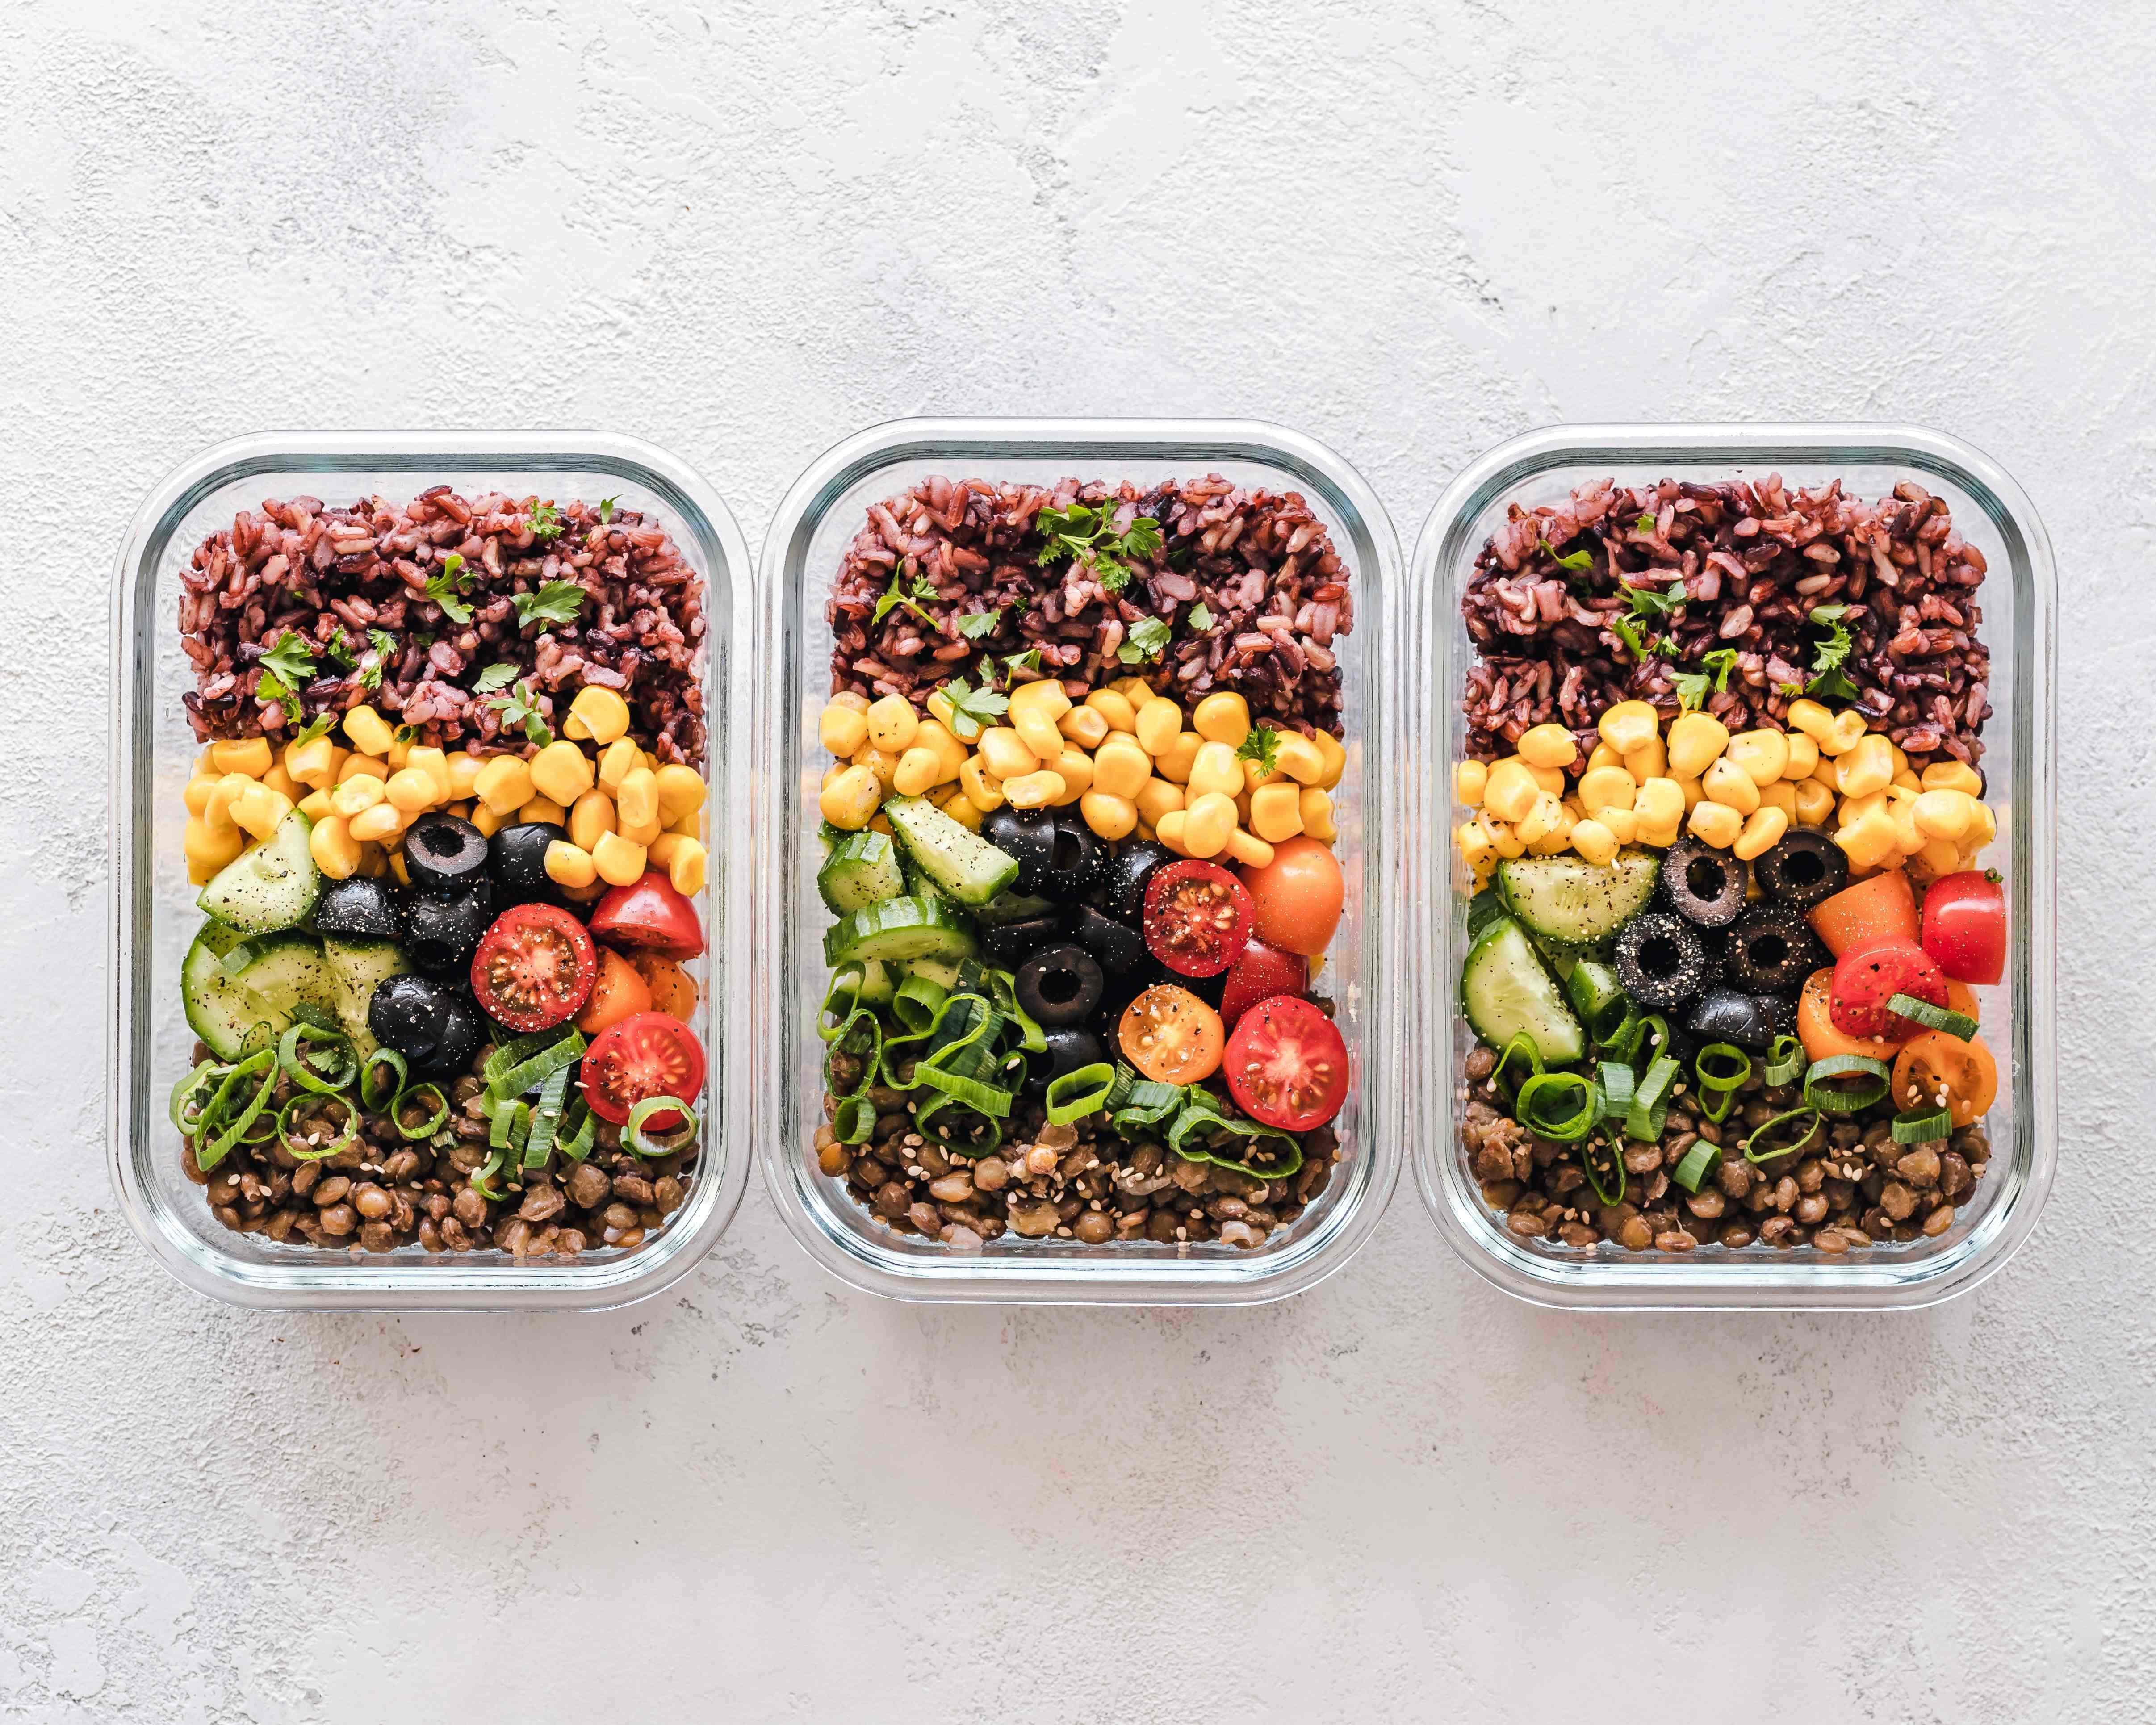 Meals portioned out evenly into separate containers